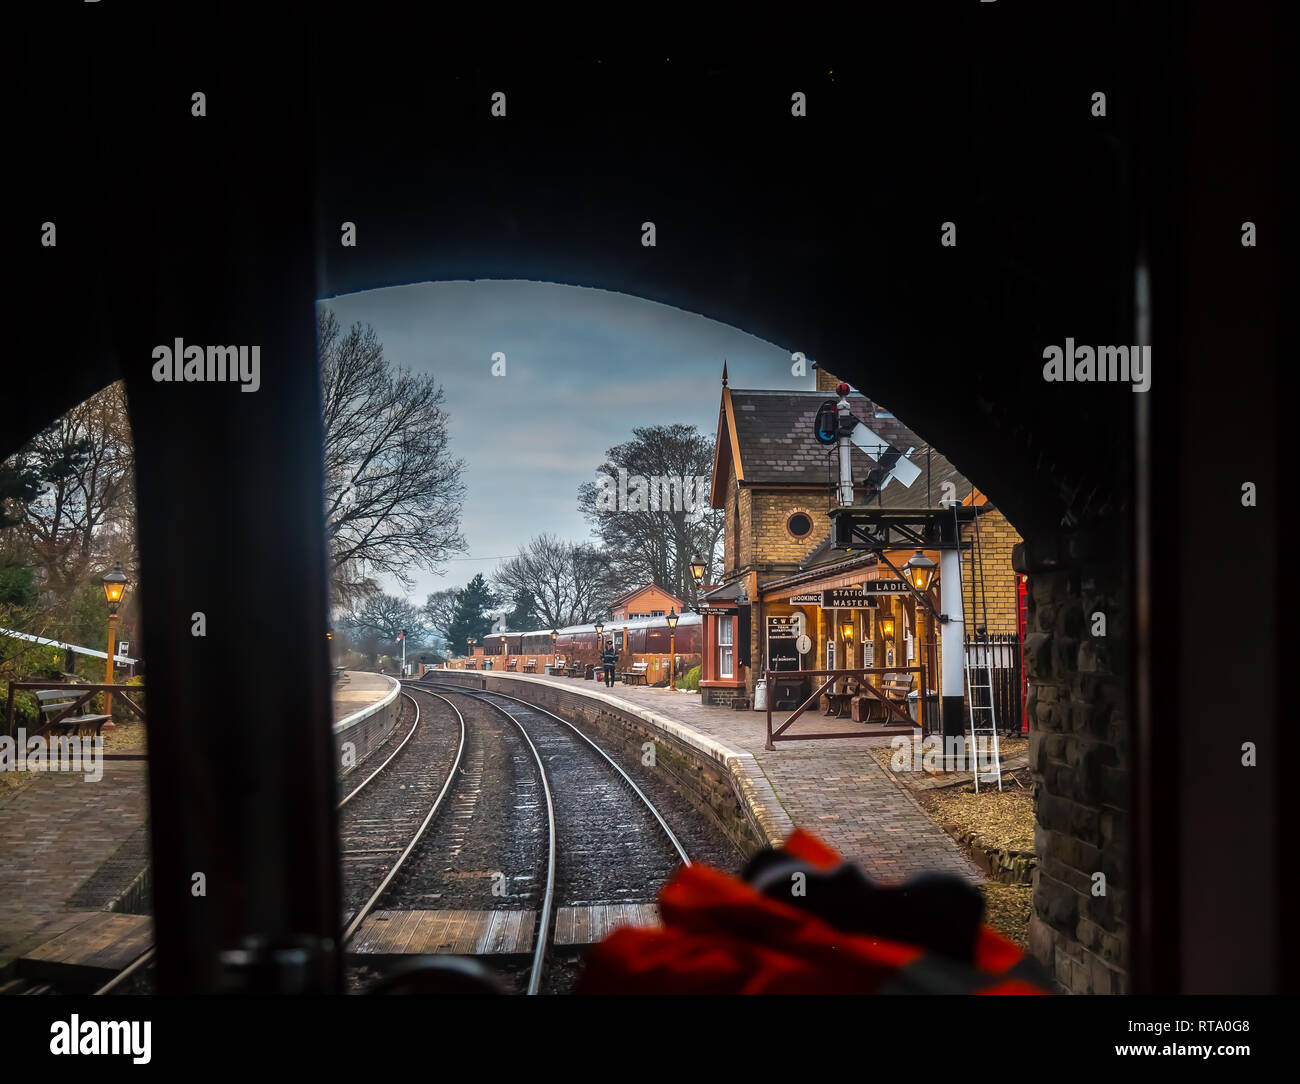 Train driver's cockpit view, from inside cab, through the window of a moving train on heritage SVR line, approaching vintage railway station, Arley. Stock Photo